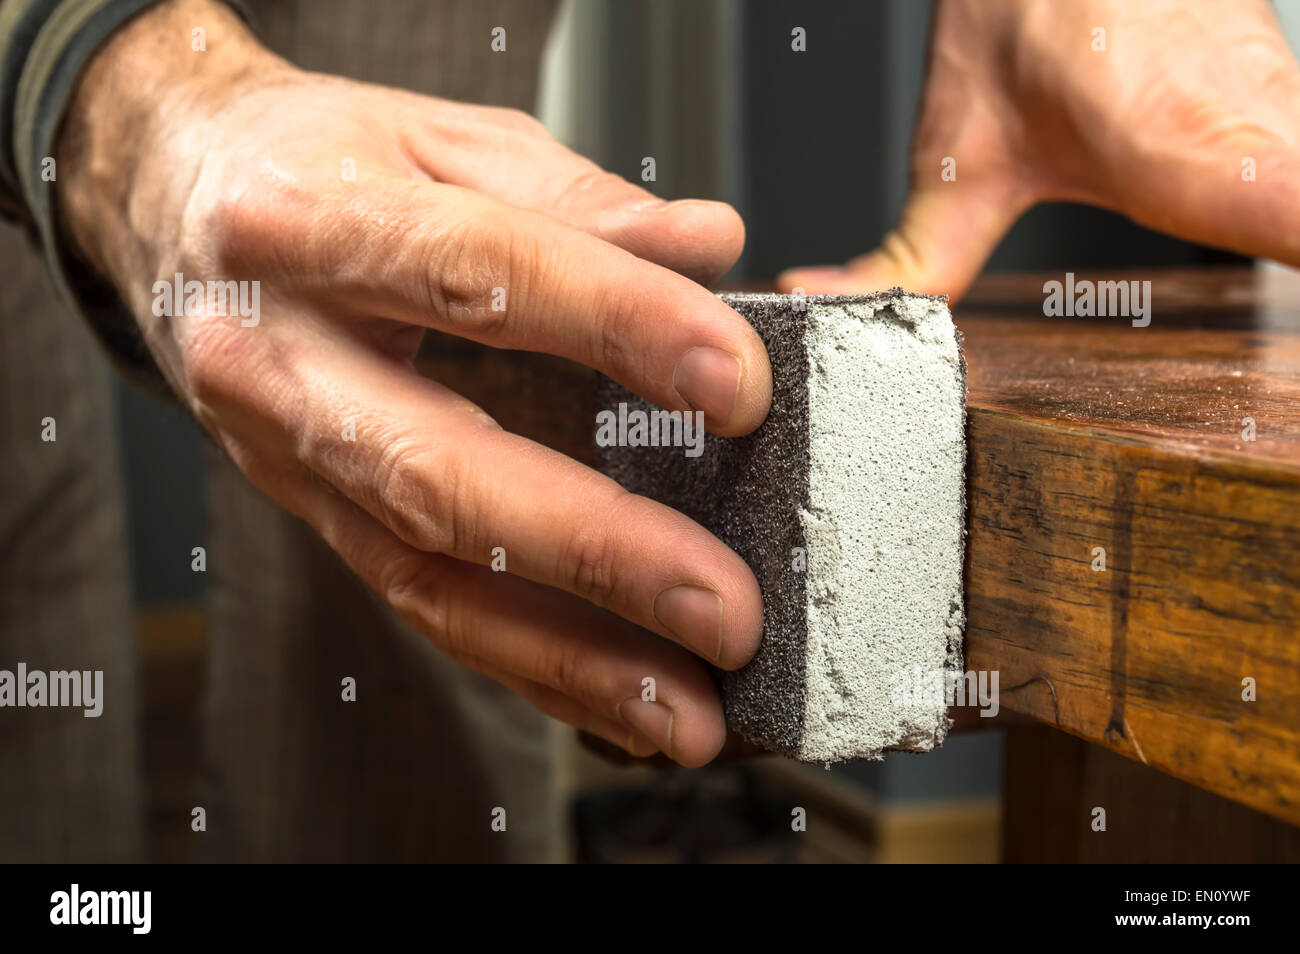 Handyman working with sandpaper on a wooden table Stock Photo